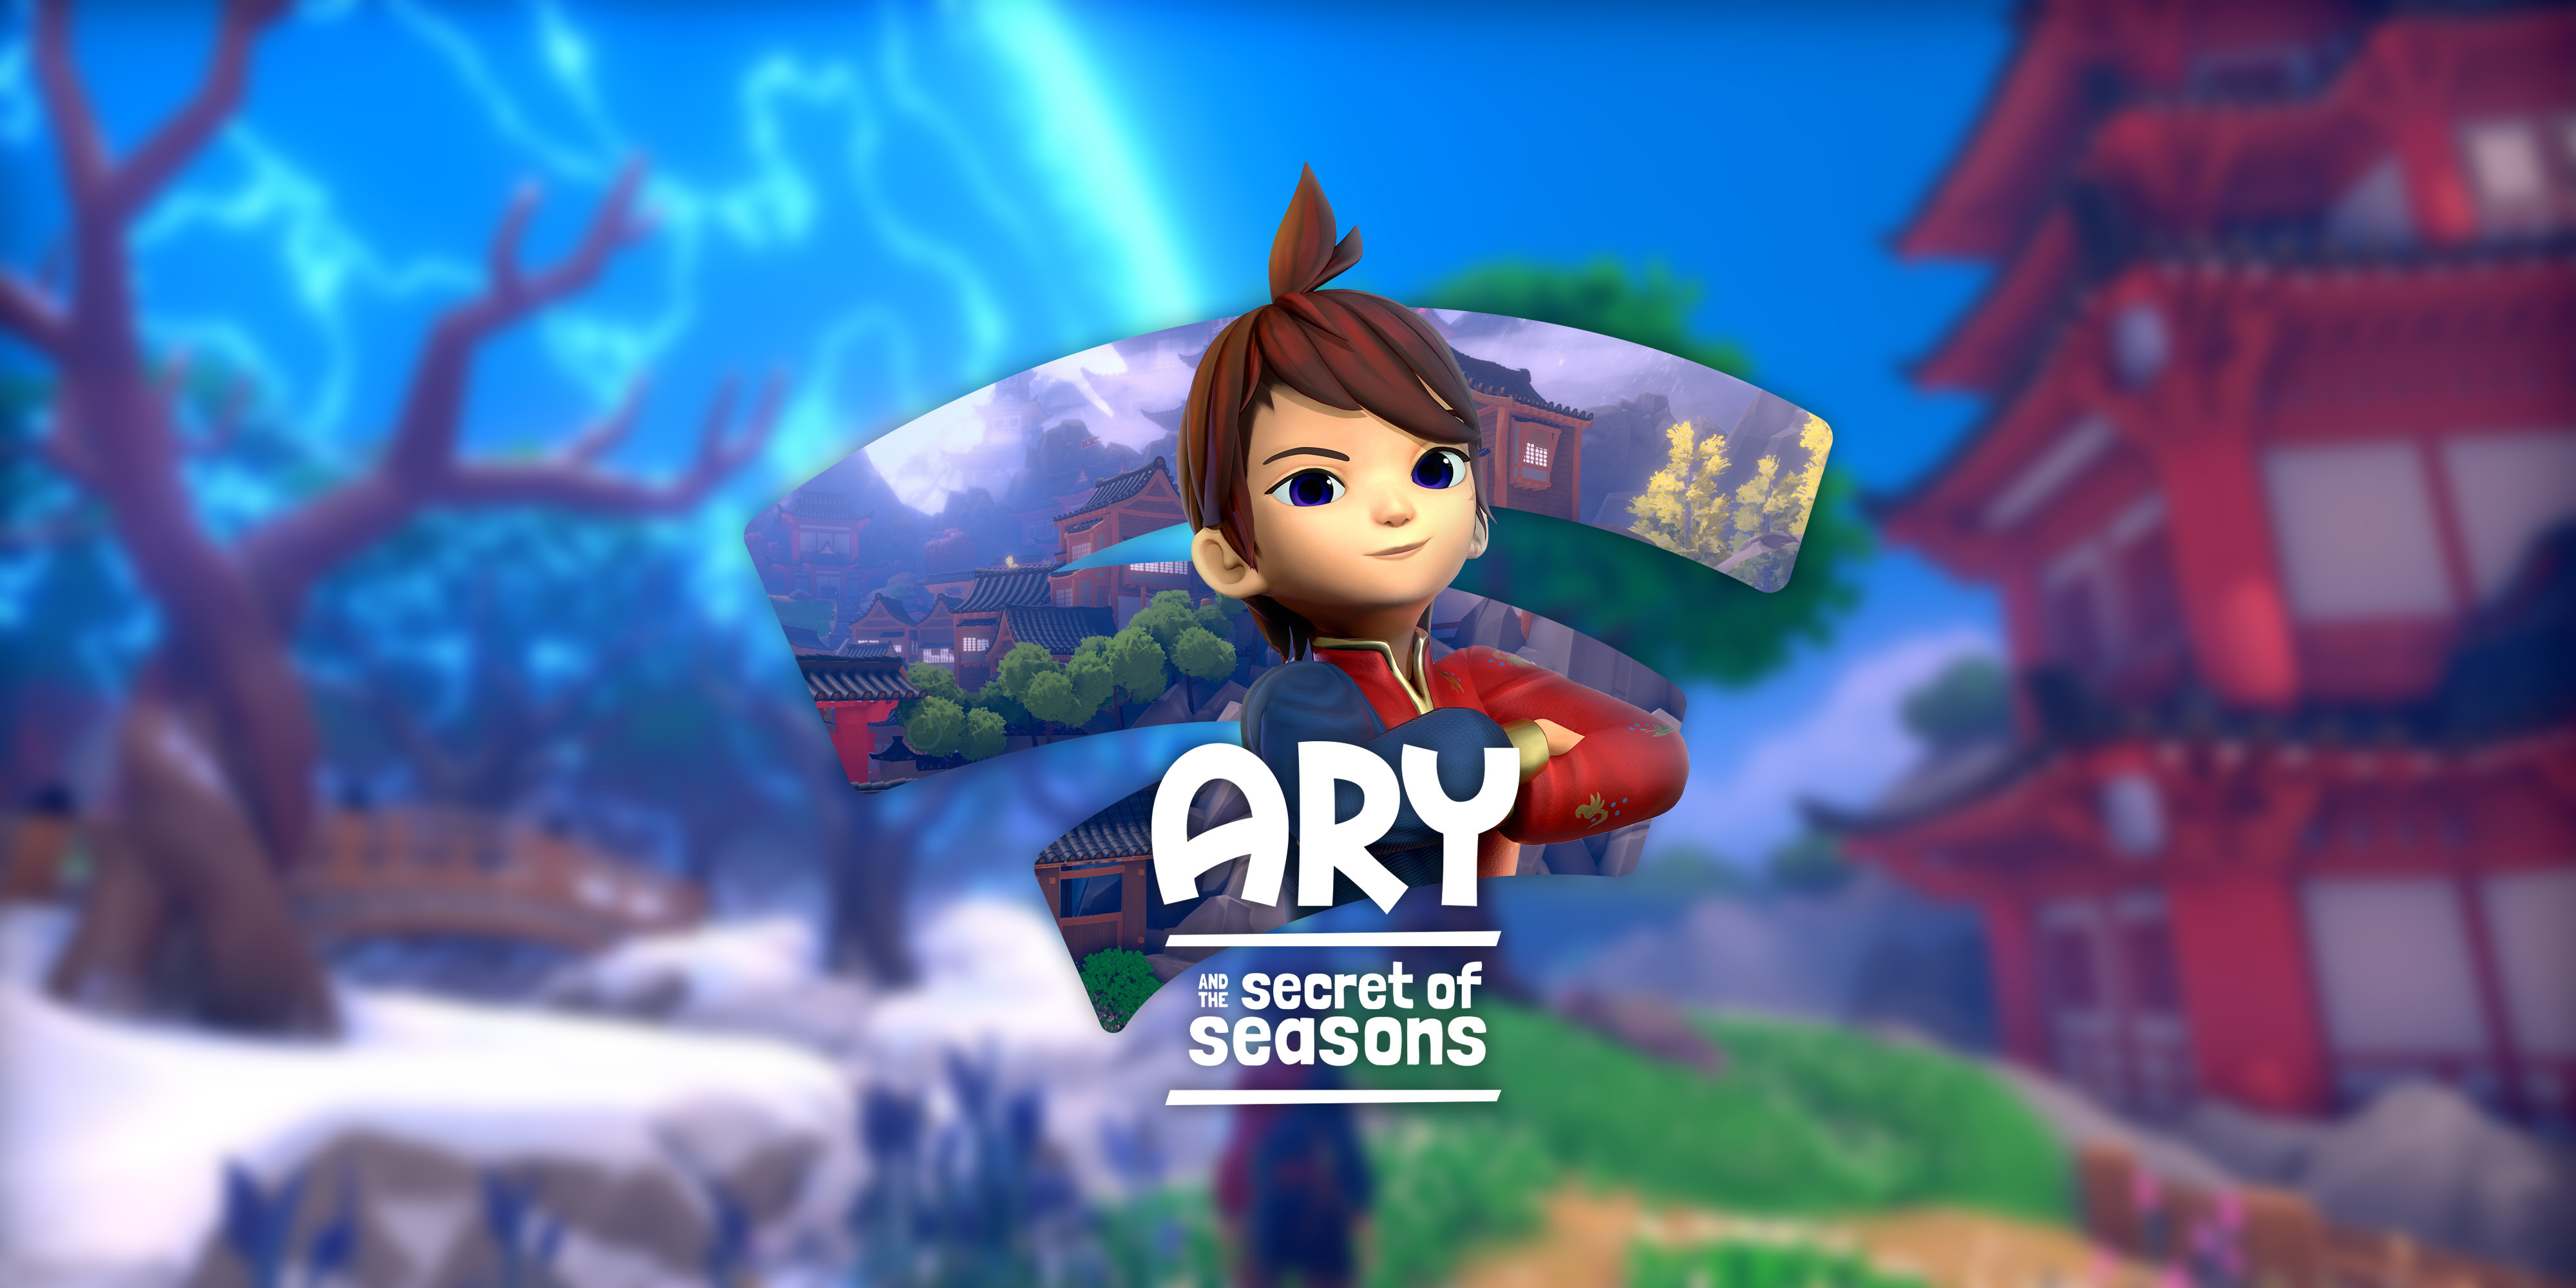 ary and the secret of seasons stadia